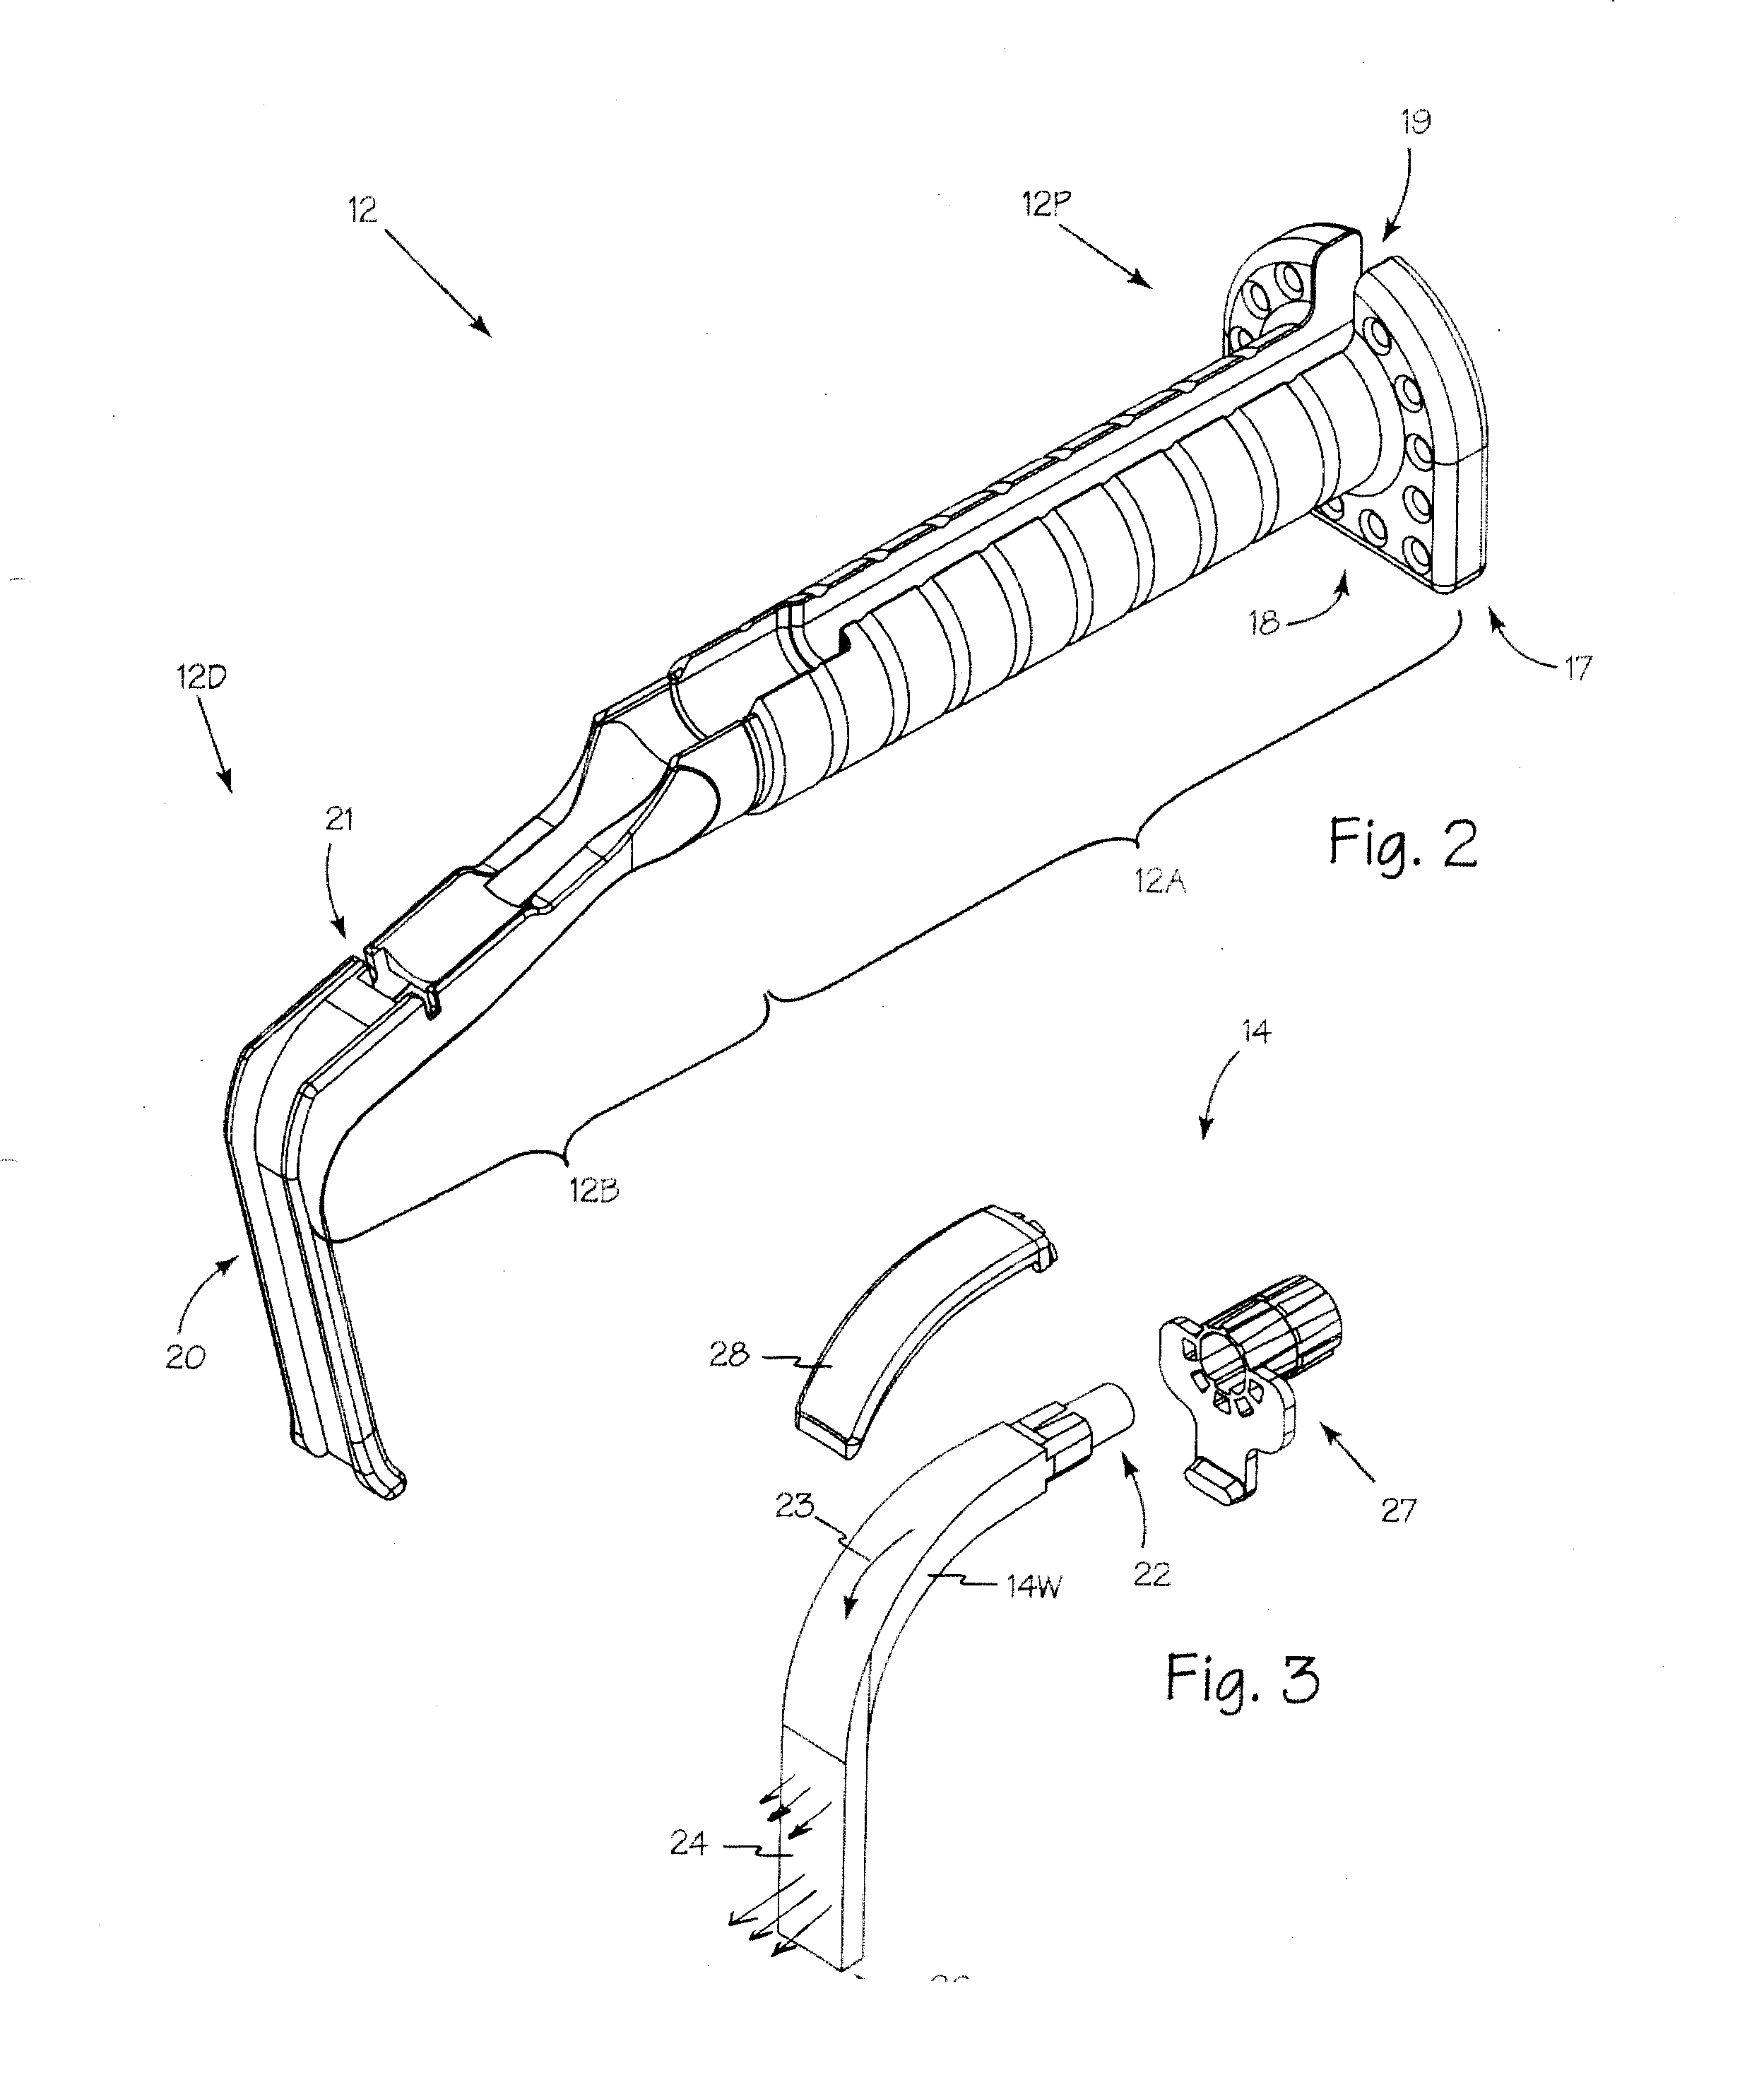 Method and apparatus for soft tissue retraction